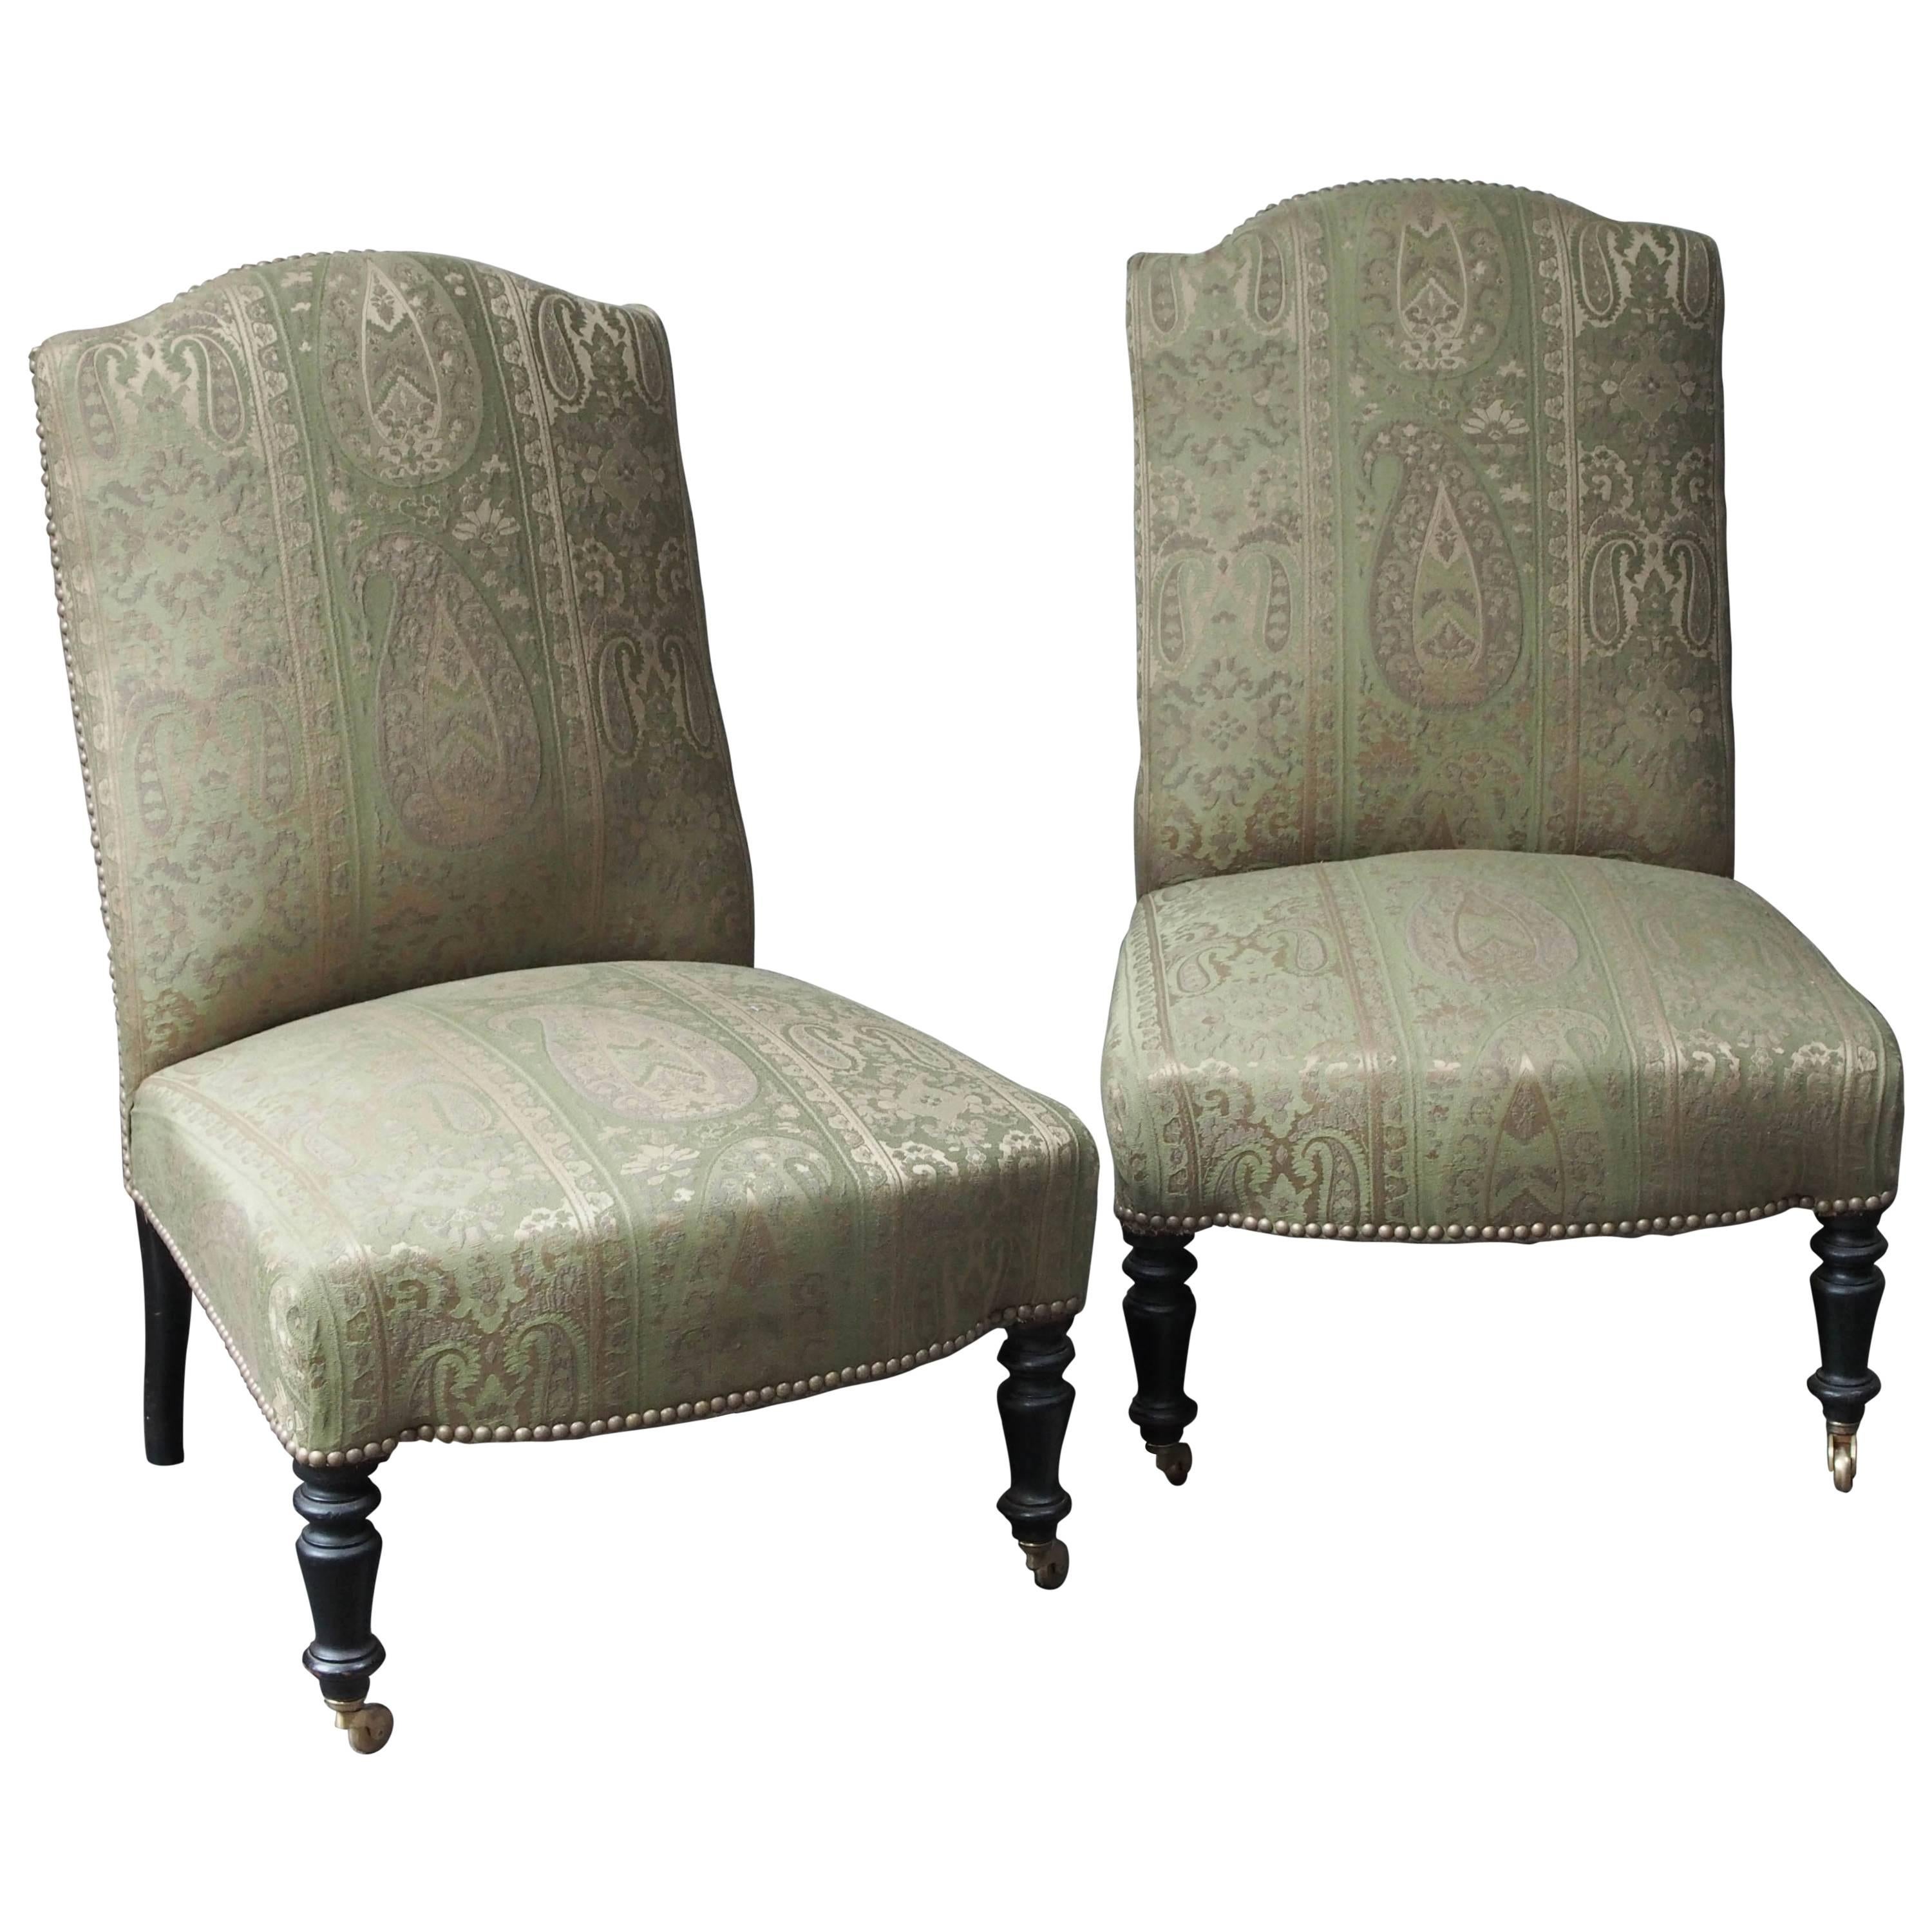 Pair of French Napoleon III Period Upholstered Chauffeuses